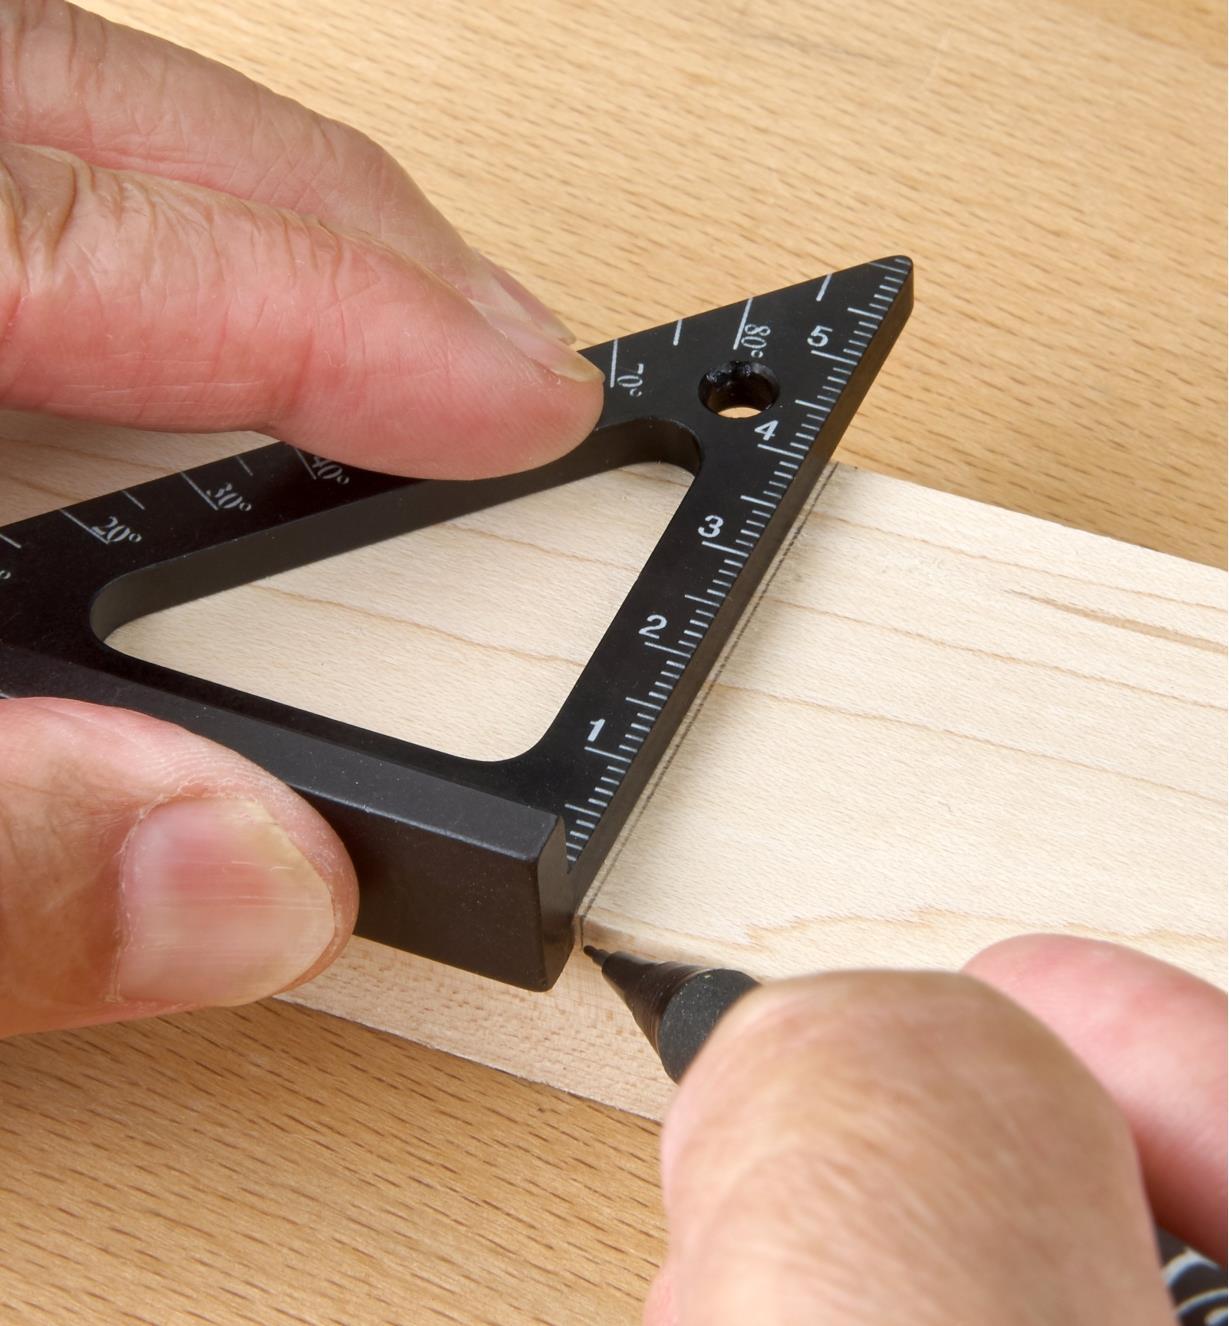 Registering a 60mm Pocket Layout Square against the edge of a workpiece while marking a cut line